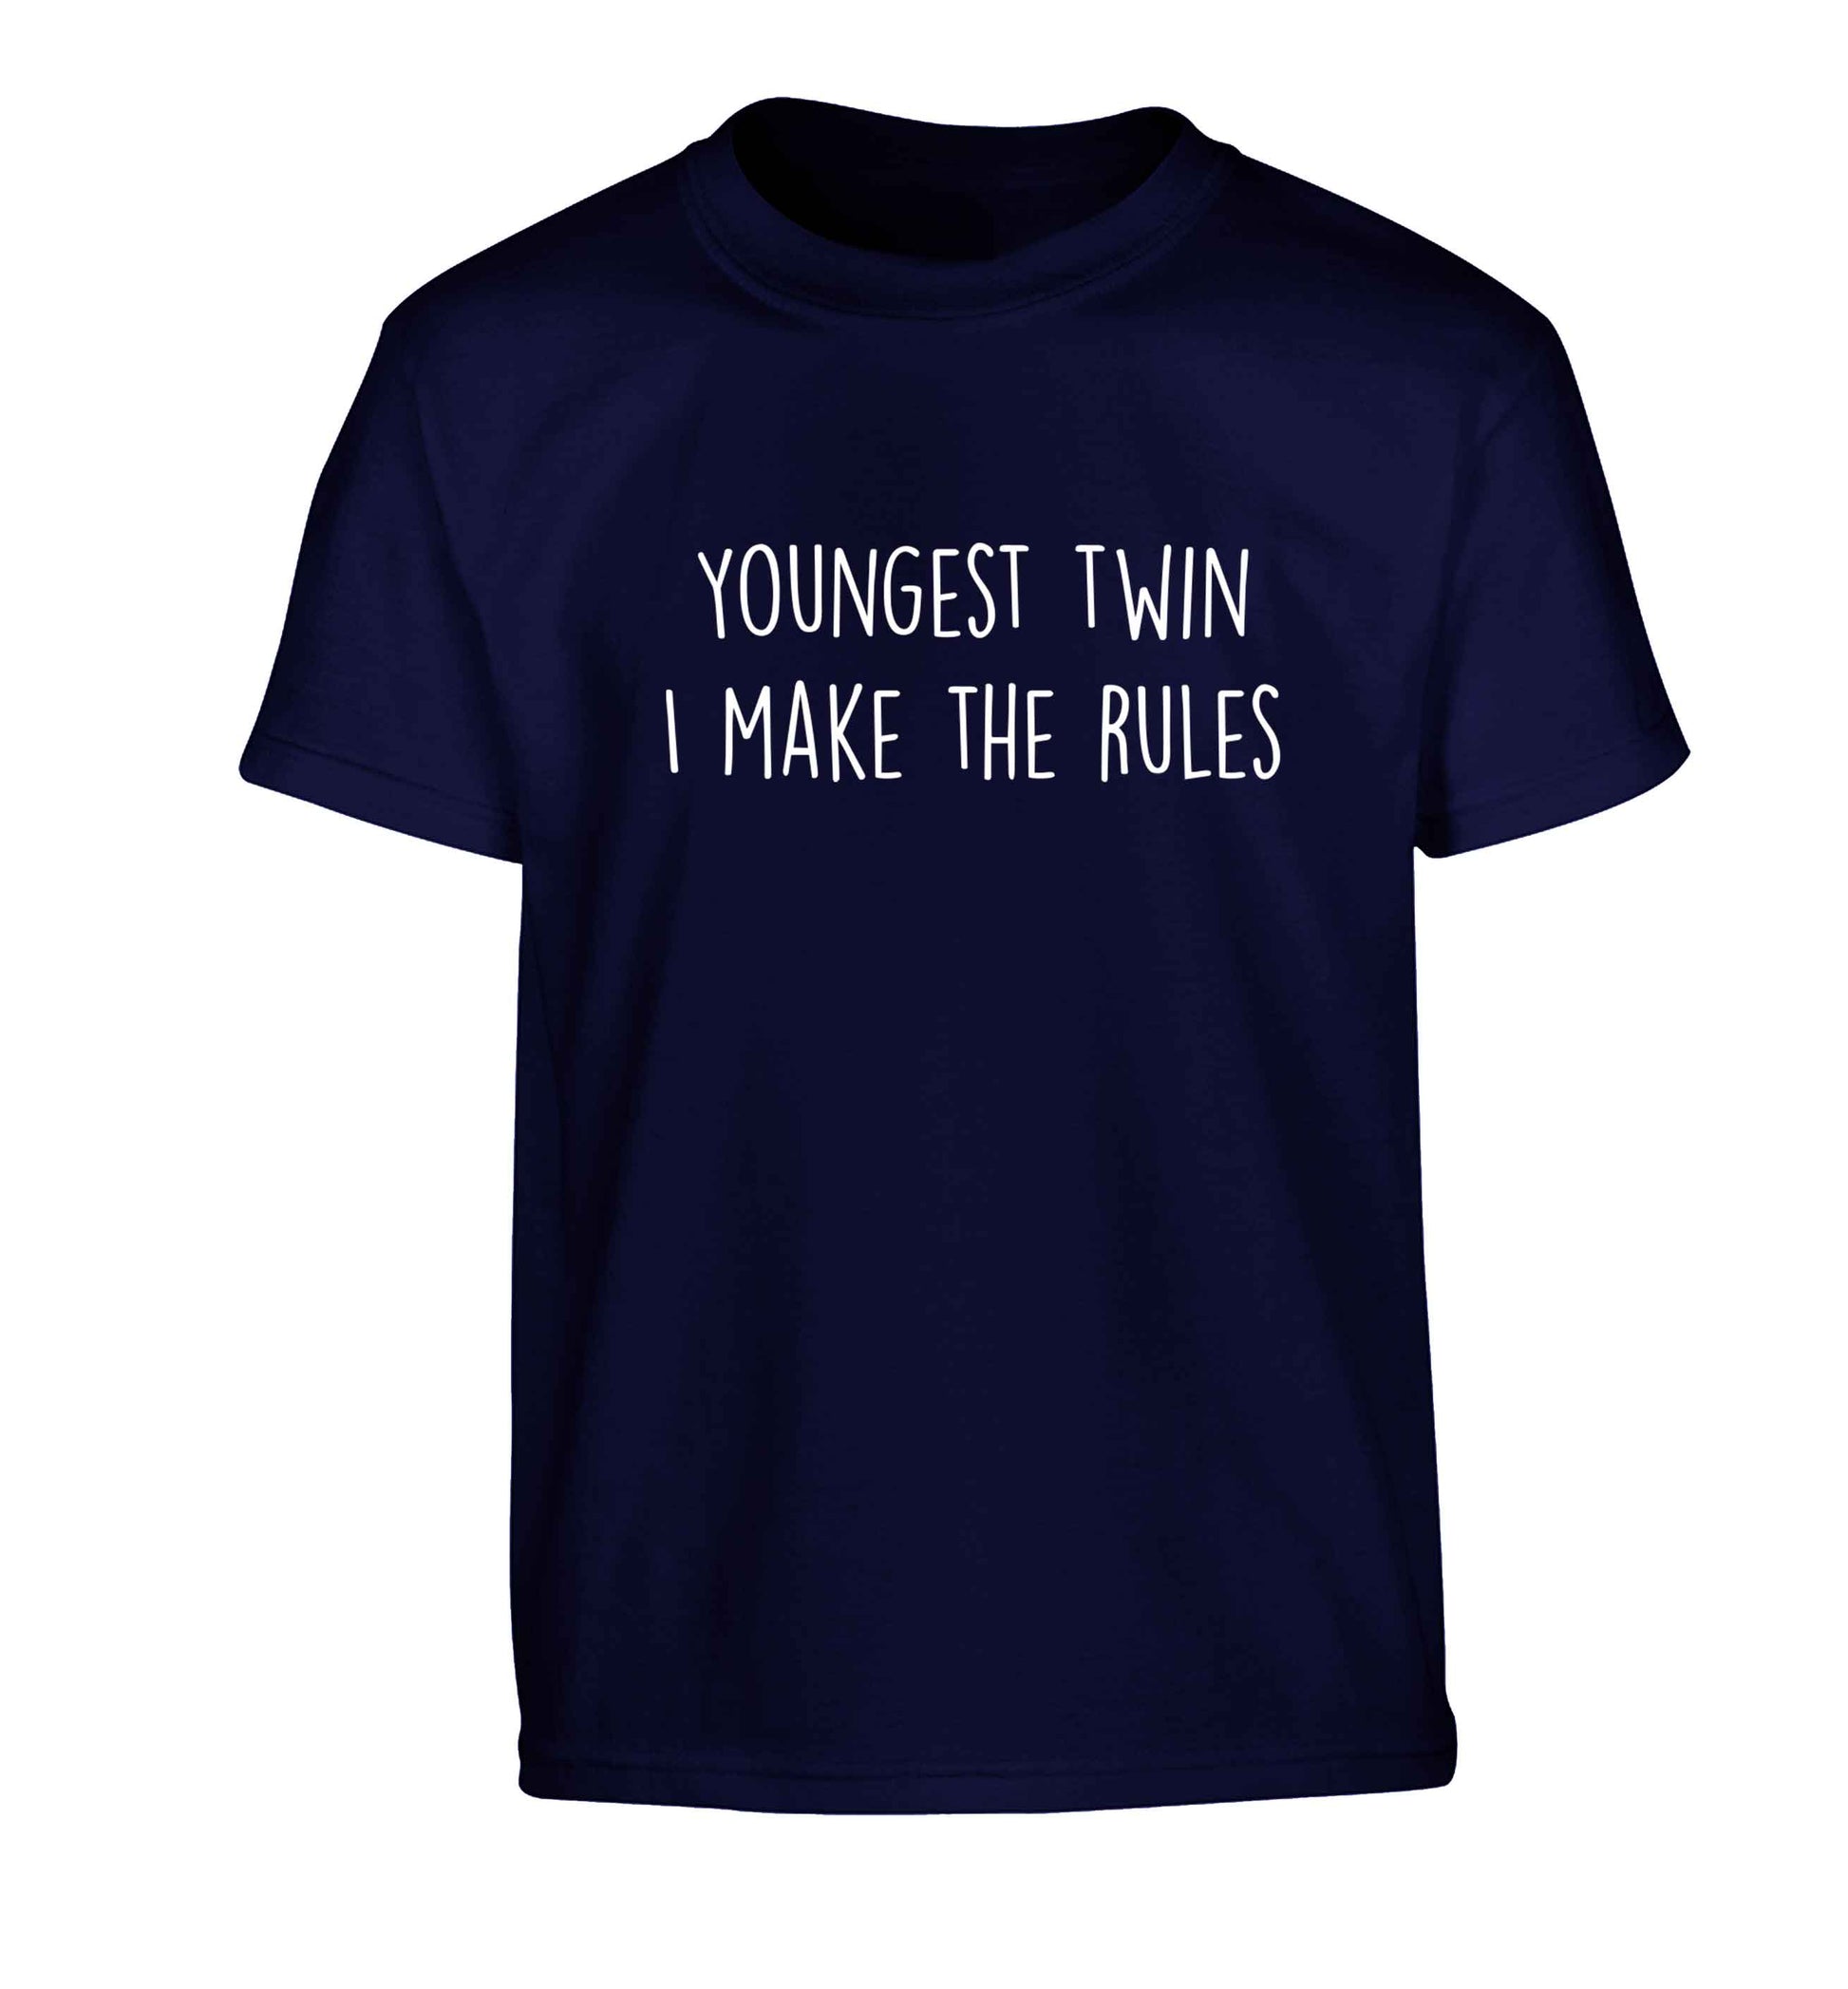 Youngest twin I make the rules Children's navy Tshirt 12-13 Years